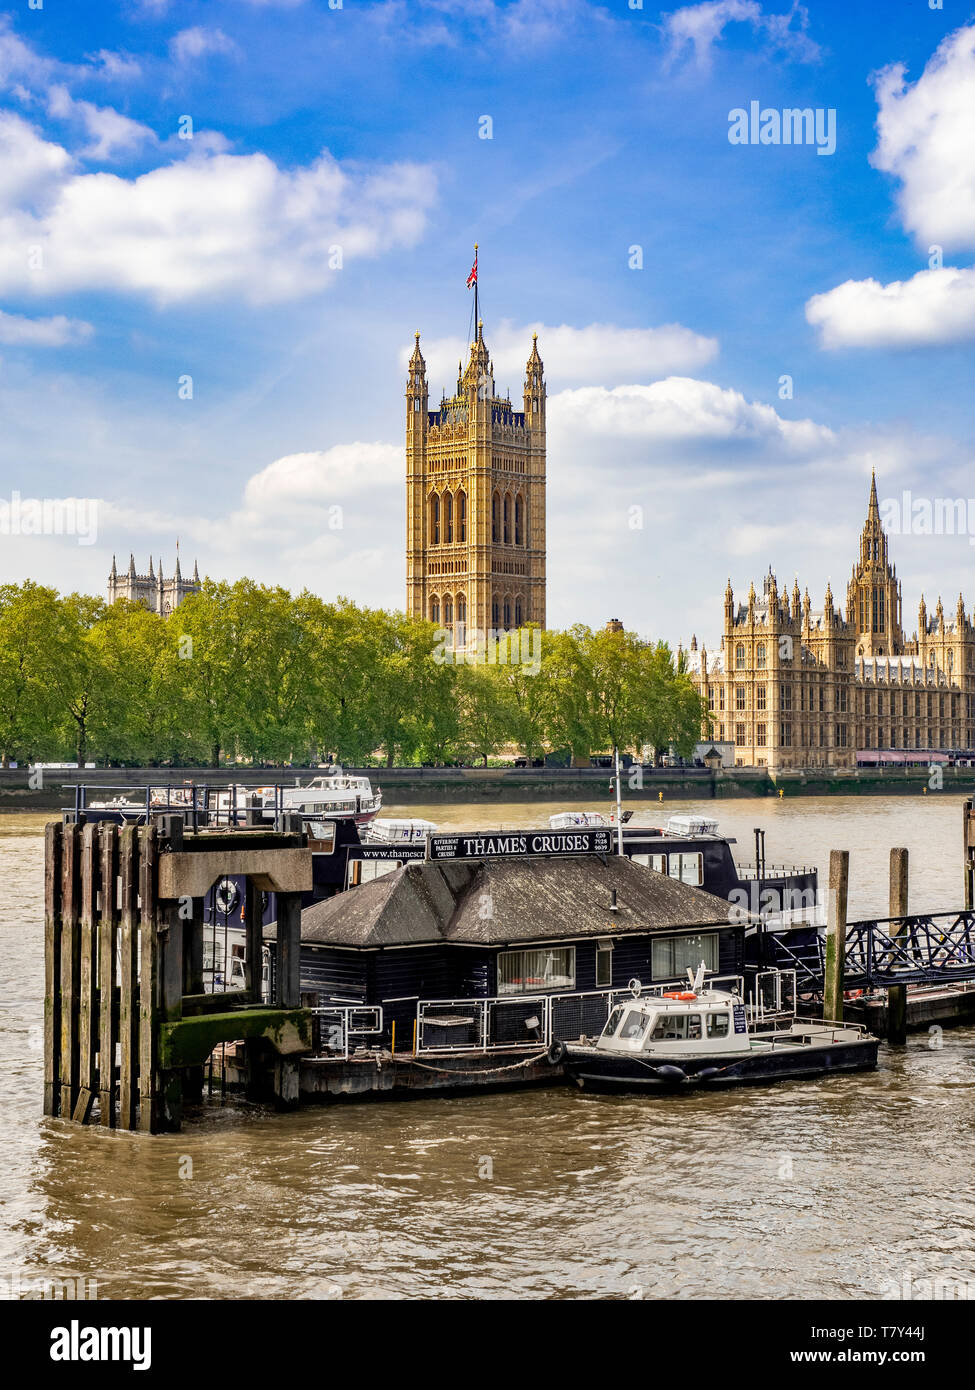 River Thames with Victoria Tower and gardens in background, Westminster, London, UK. Stock Photo